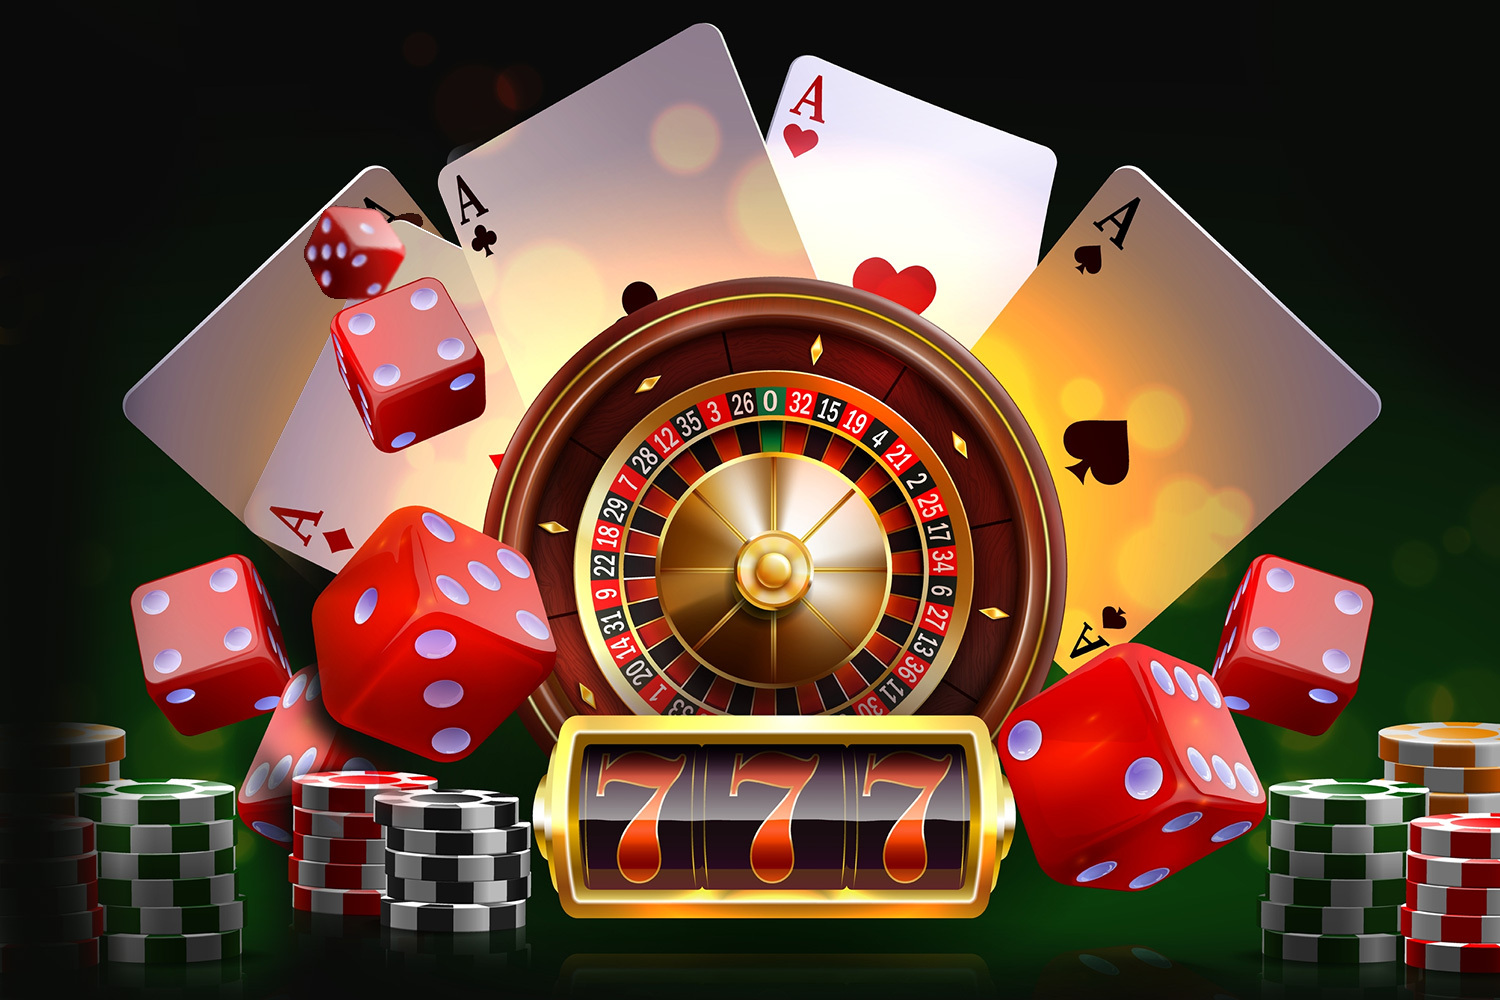 Don't casino Unless You Use These 10 Tools